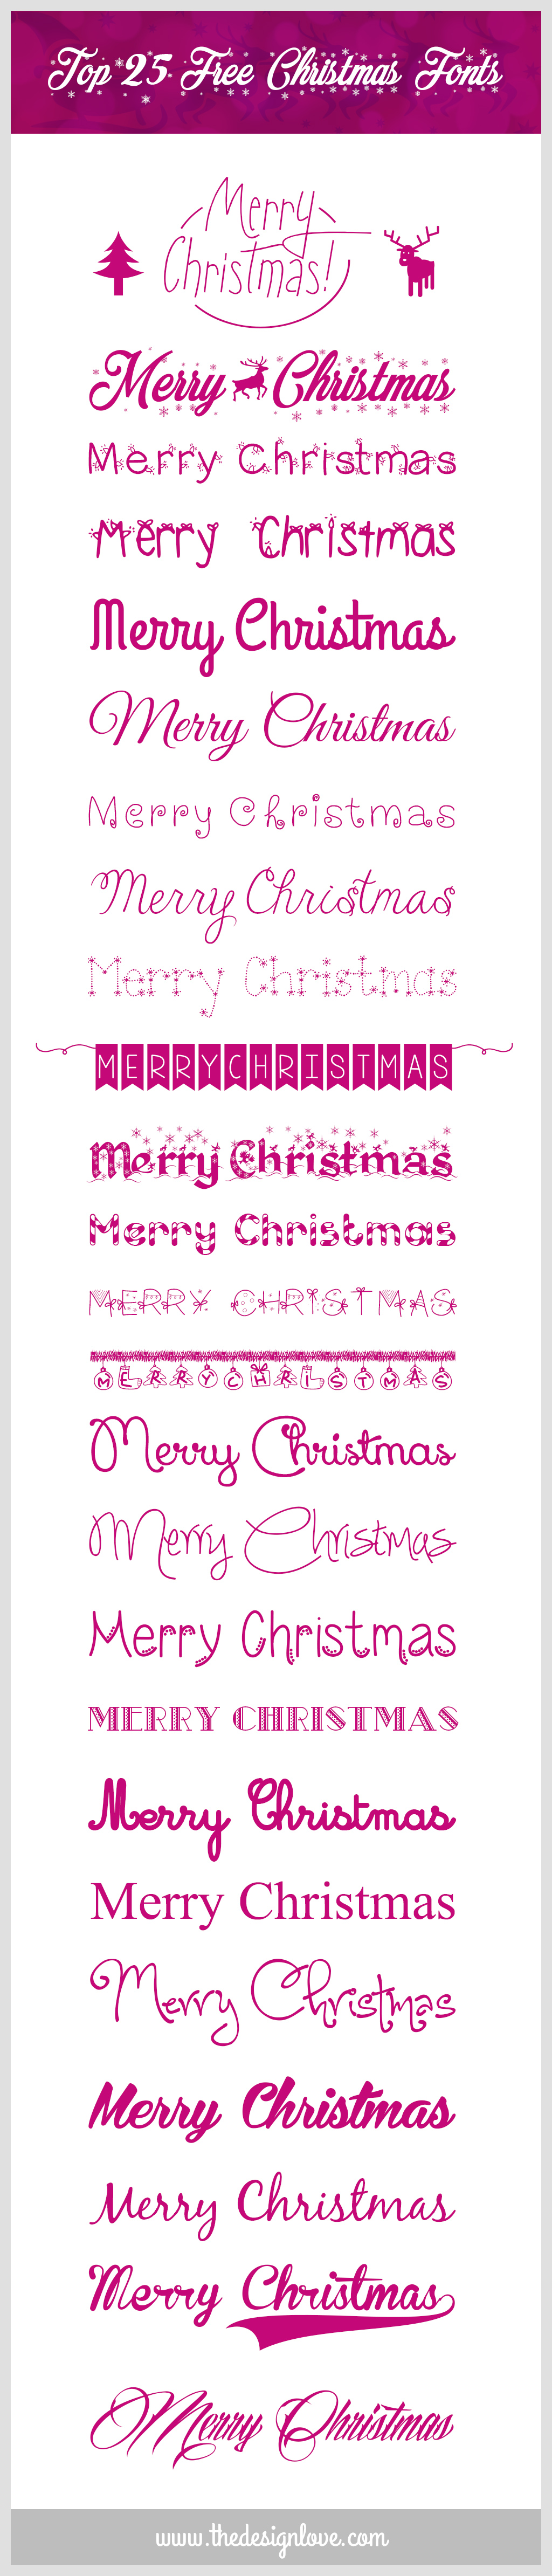 top-25-free-christmas-fonts-to-design-your-gift-cards